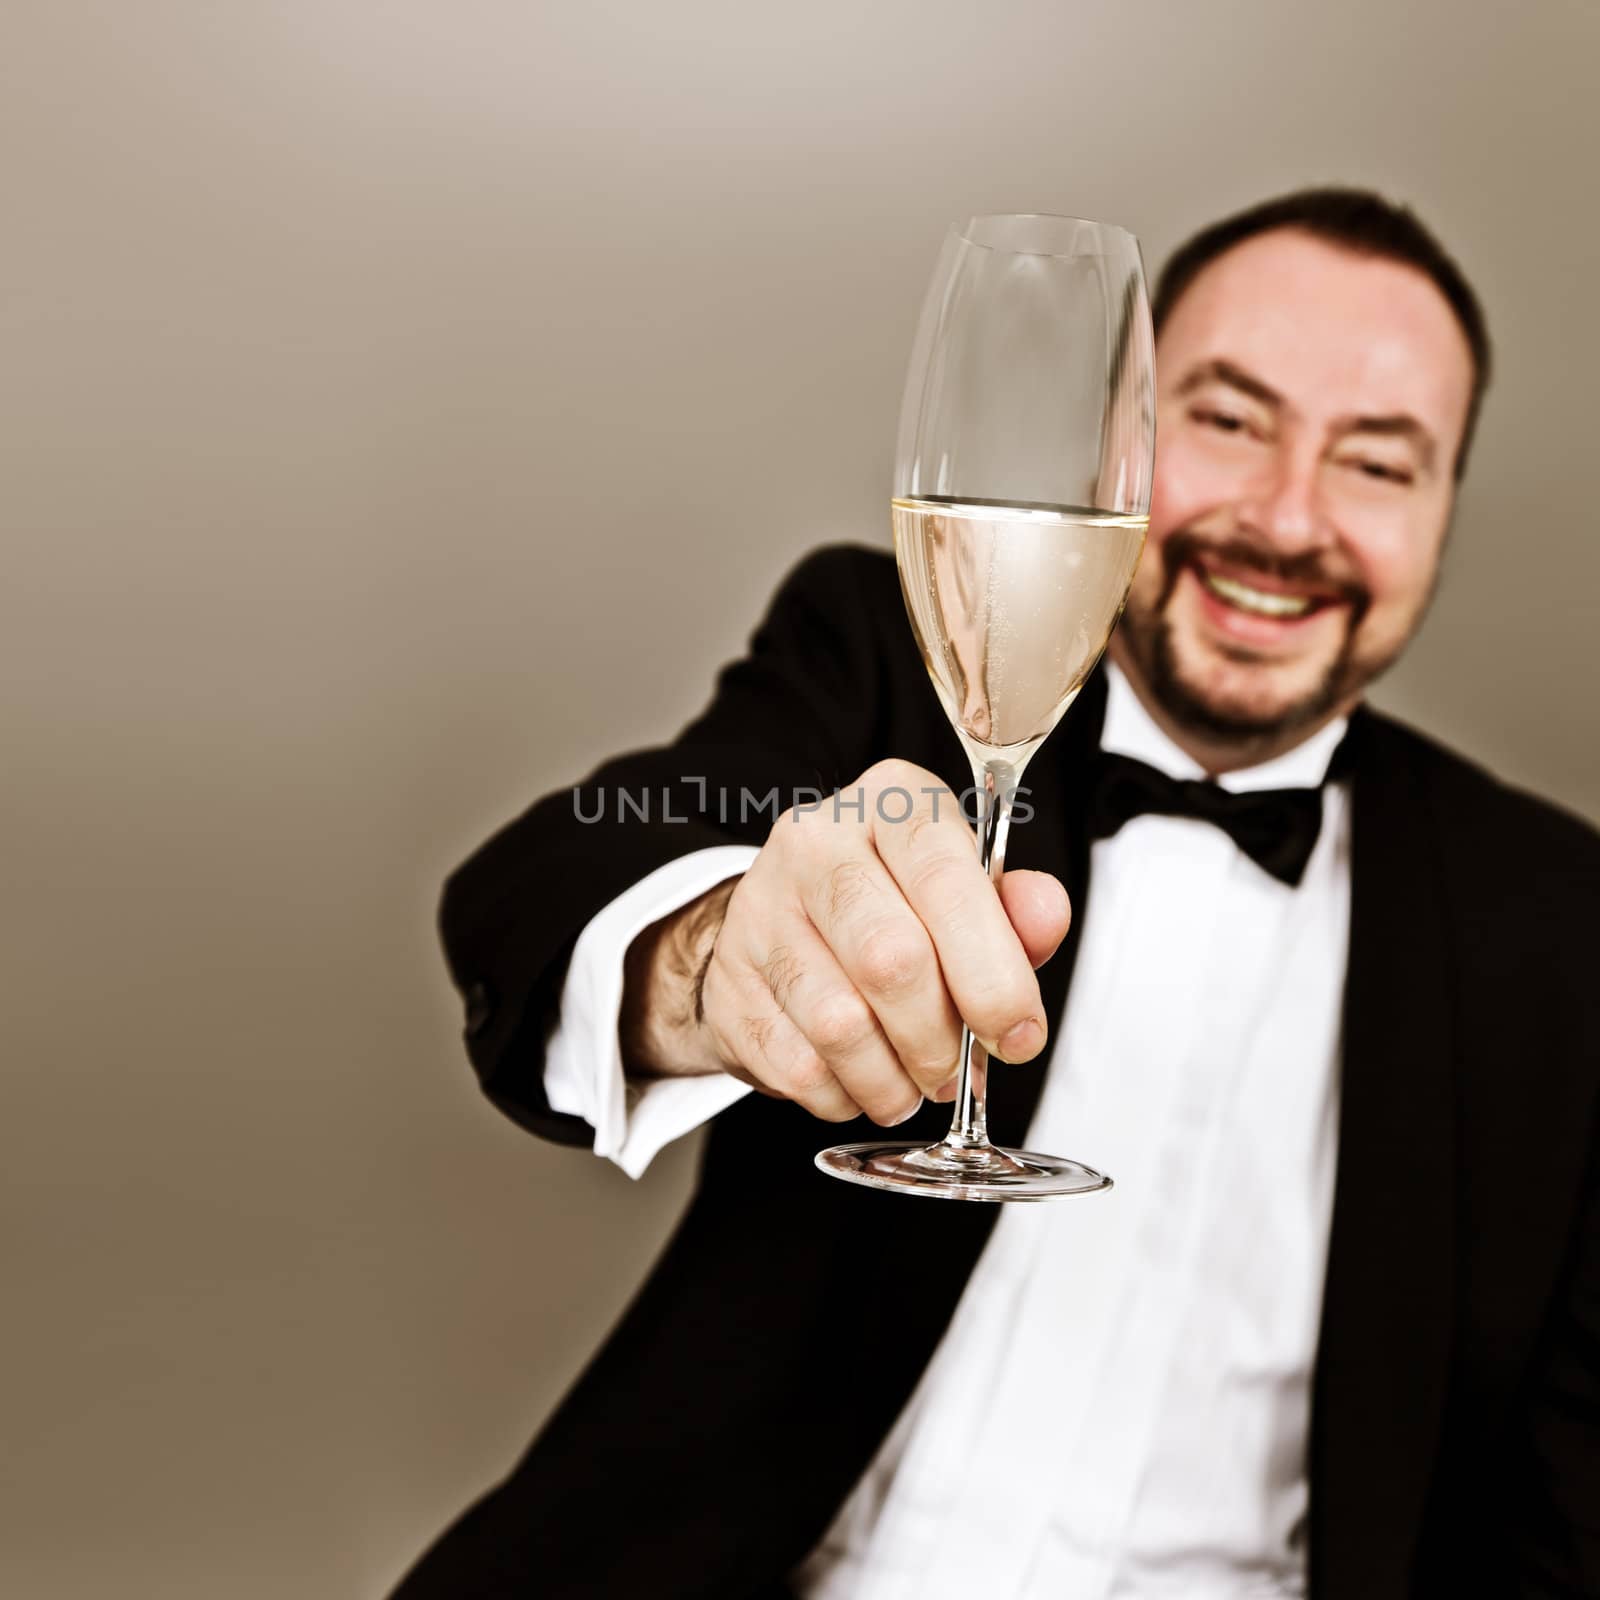 An image of a man with a glass